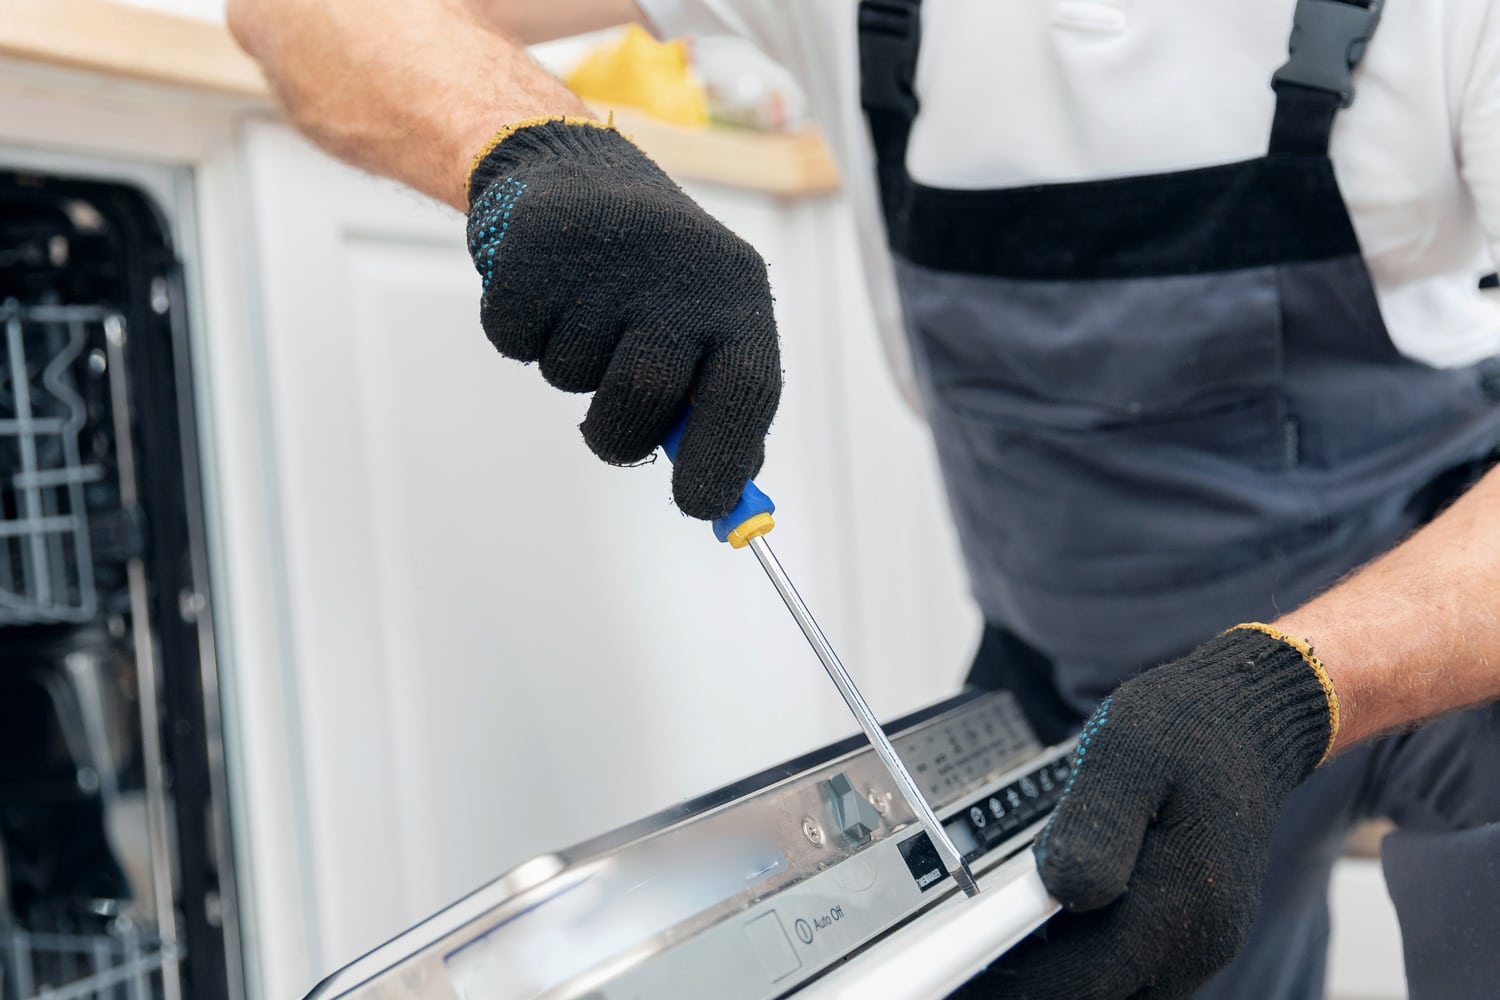 Closeup repair and installation of dishwasher, male worker with tool in uniform.